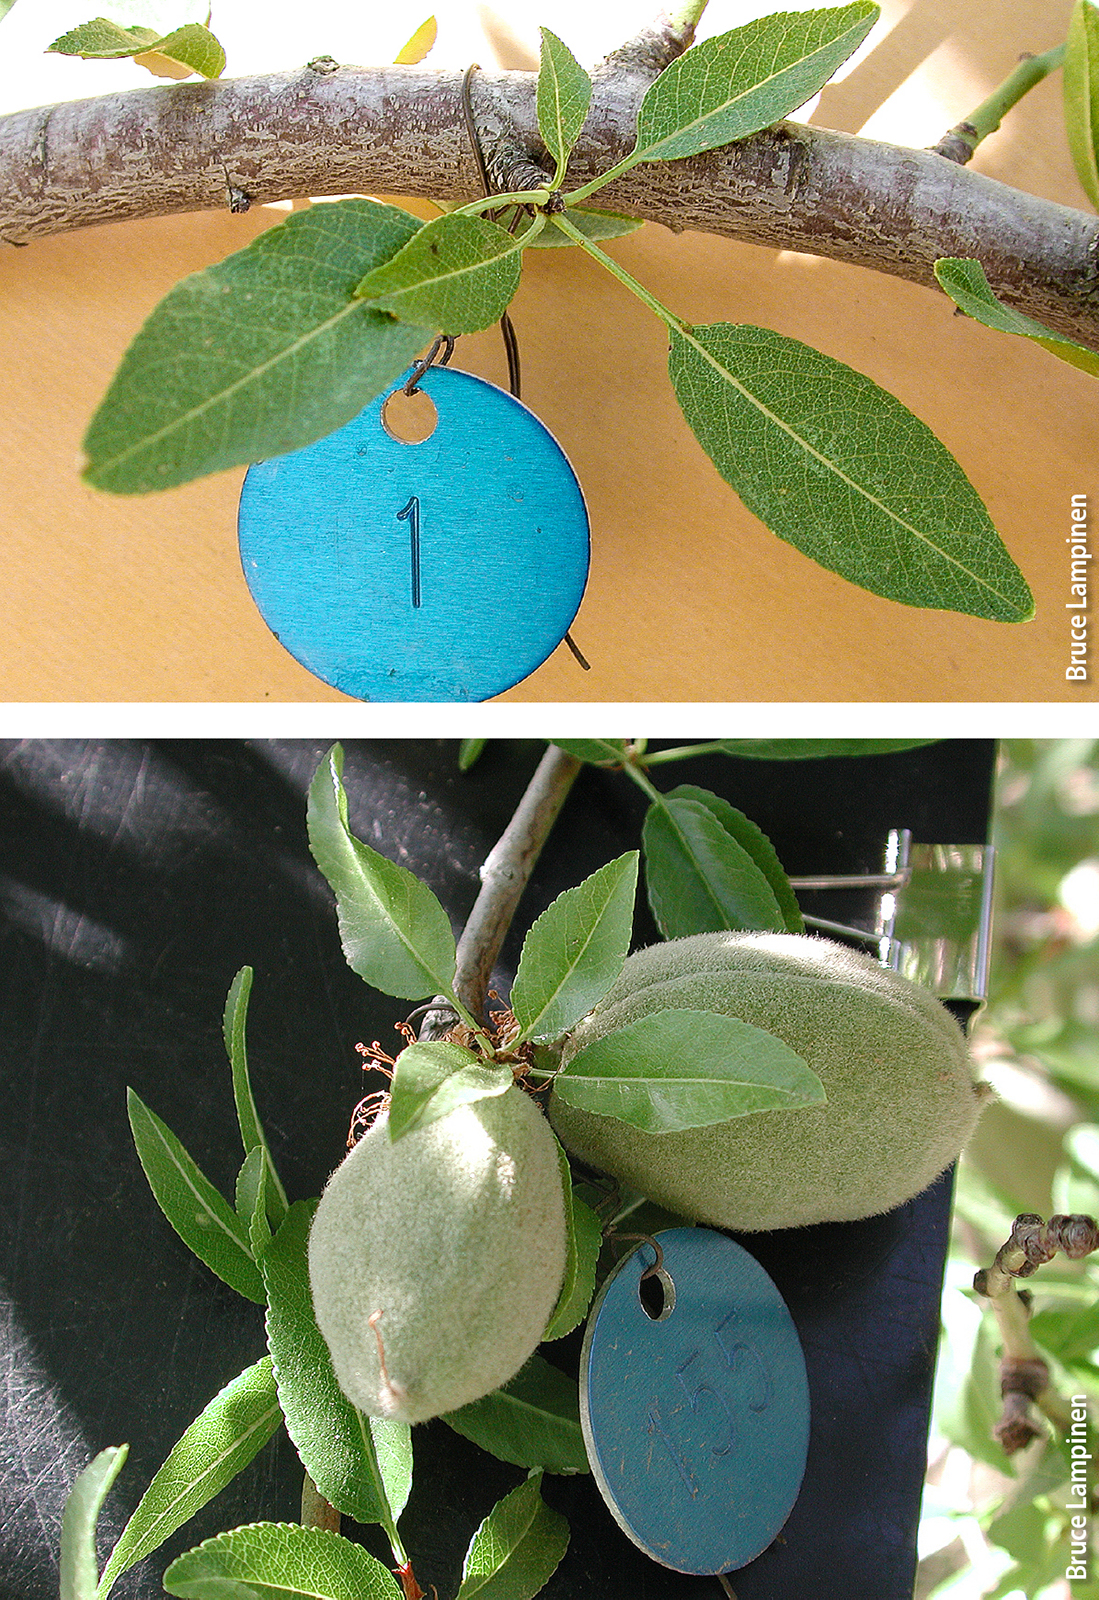 A vegetative almond spur, top, and fruitful spur, bottom, marked with aluminum tags. Spurs are short lateral shoots that are the main flowering and fruit bearing units in almond trees.